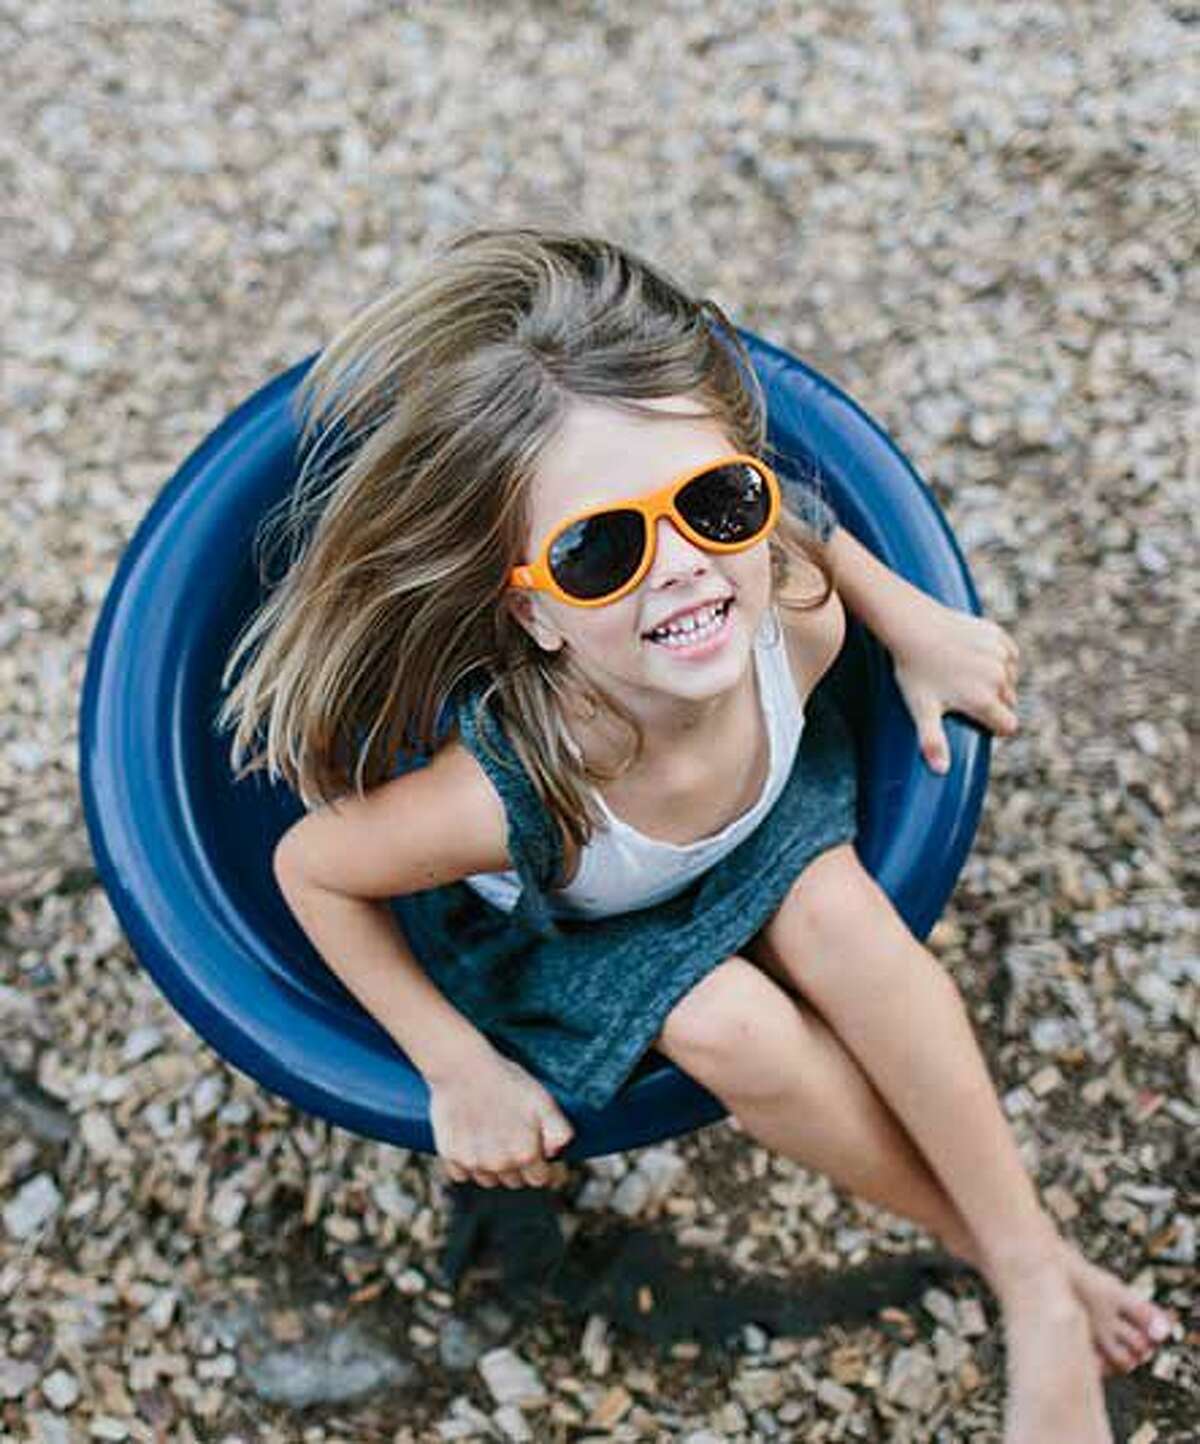 It's never too early to start wearing sunglasses.